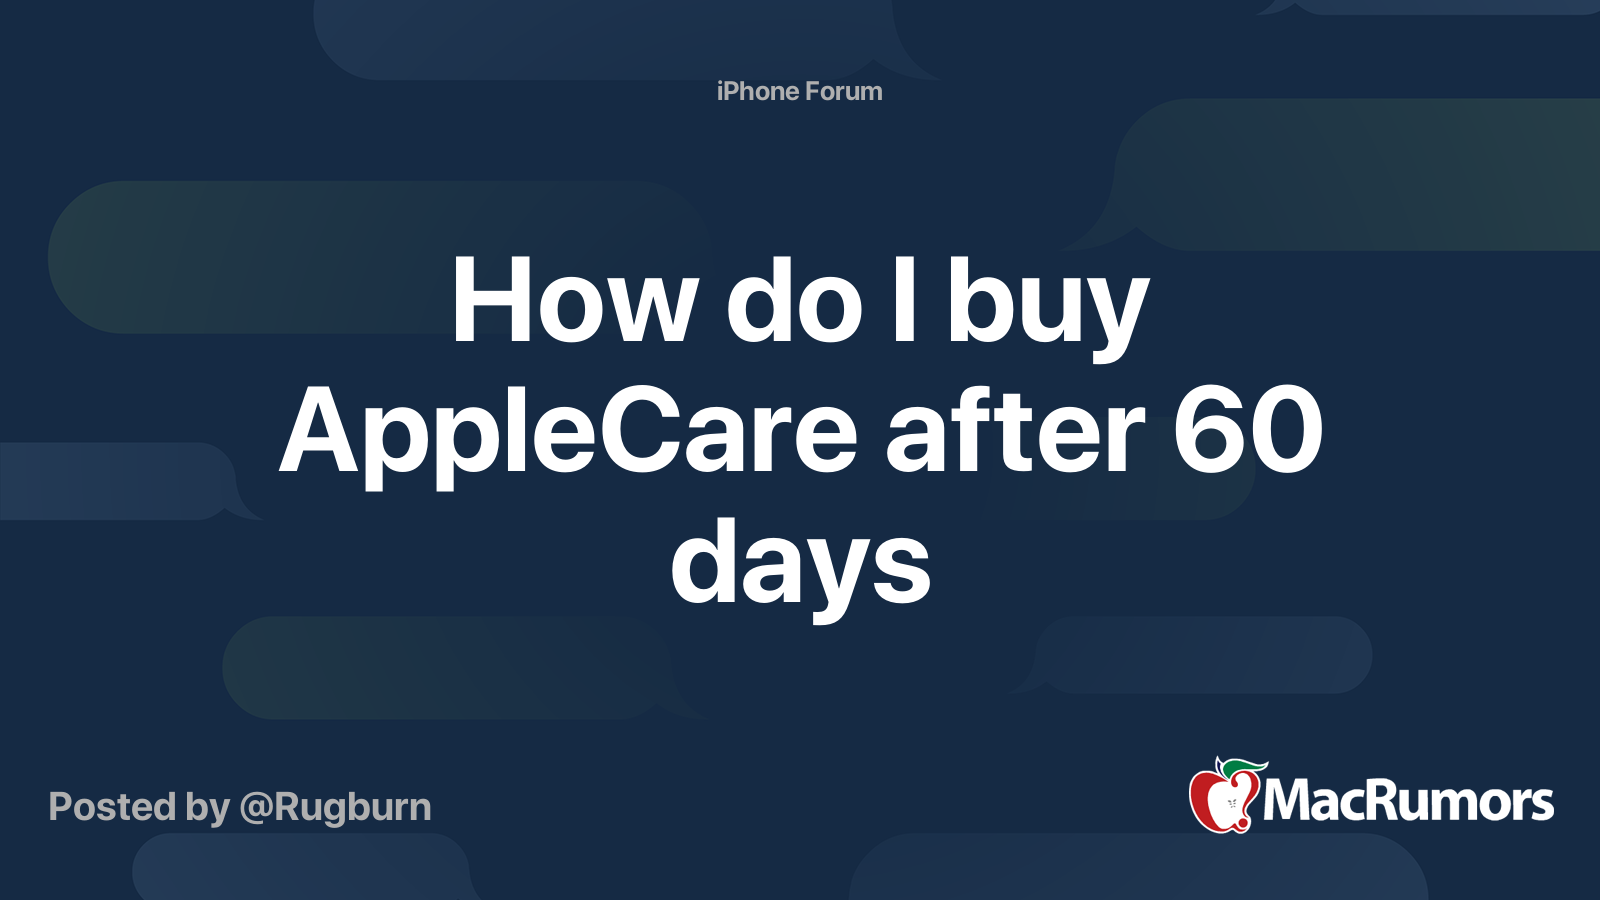 Can I buy AppleCare+ after 60 days?